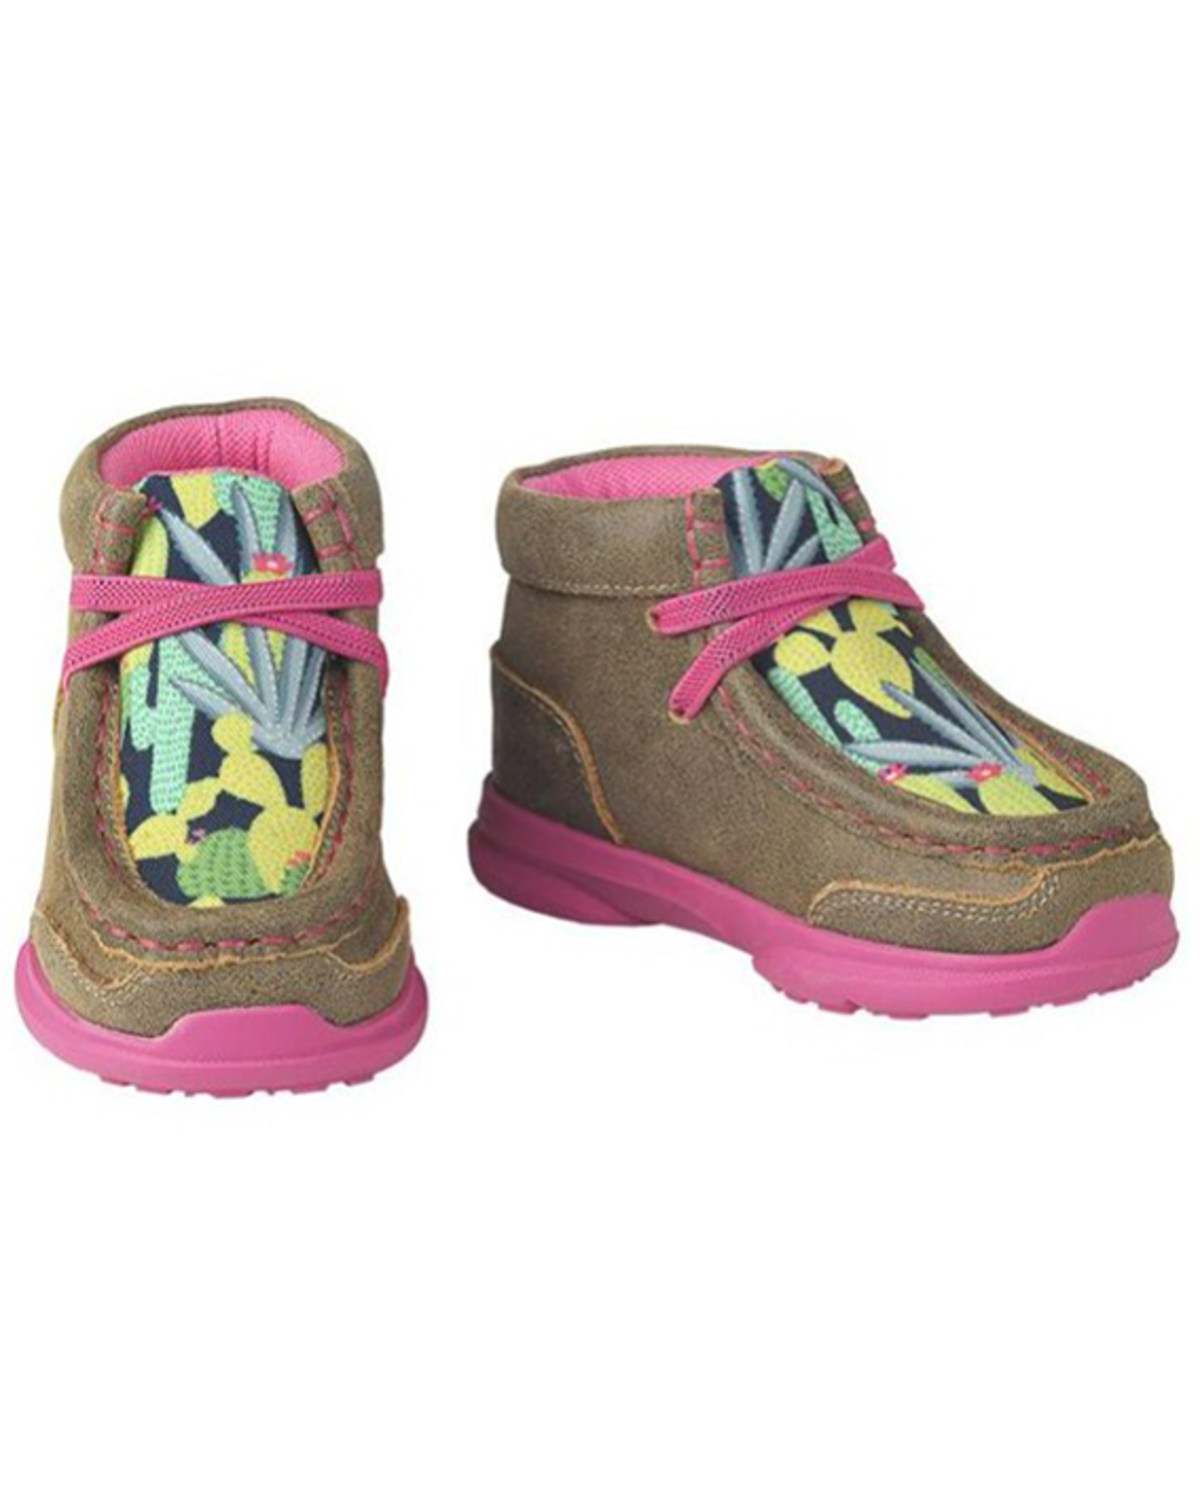 Ariat Toddler-Girls' Lil Stomper Rosewell Cactus Print Lace-Up Chukka Shoes